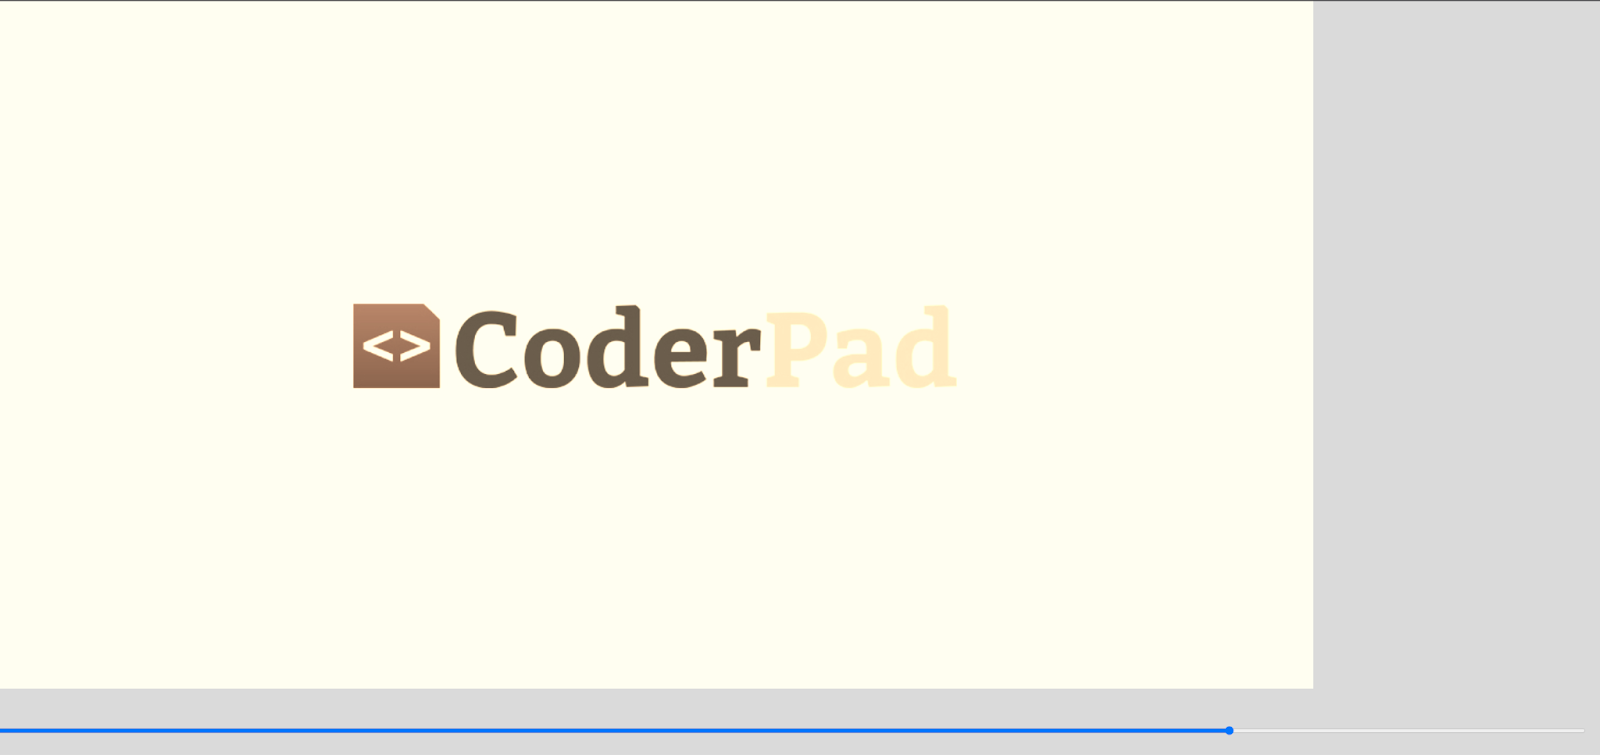 The CoderPad logo with a sepia effect applied